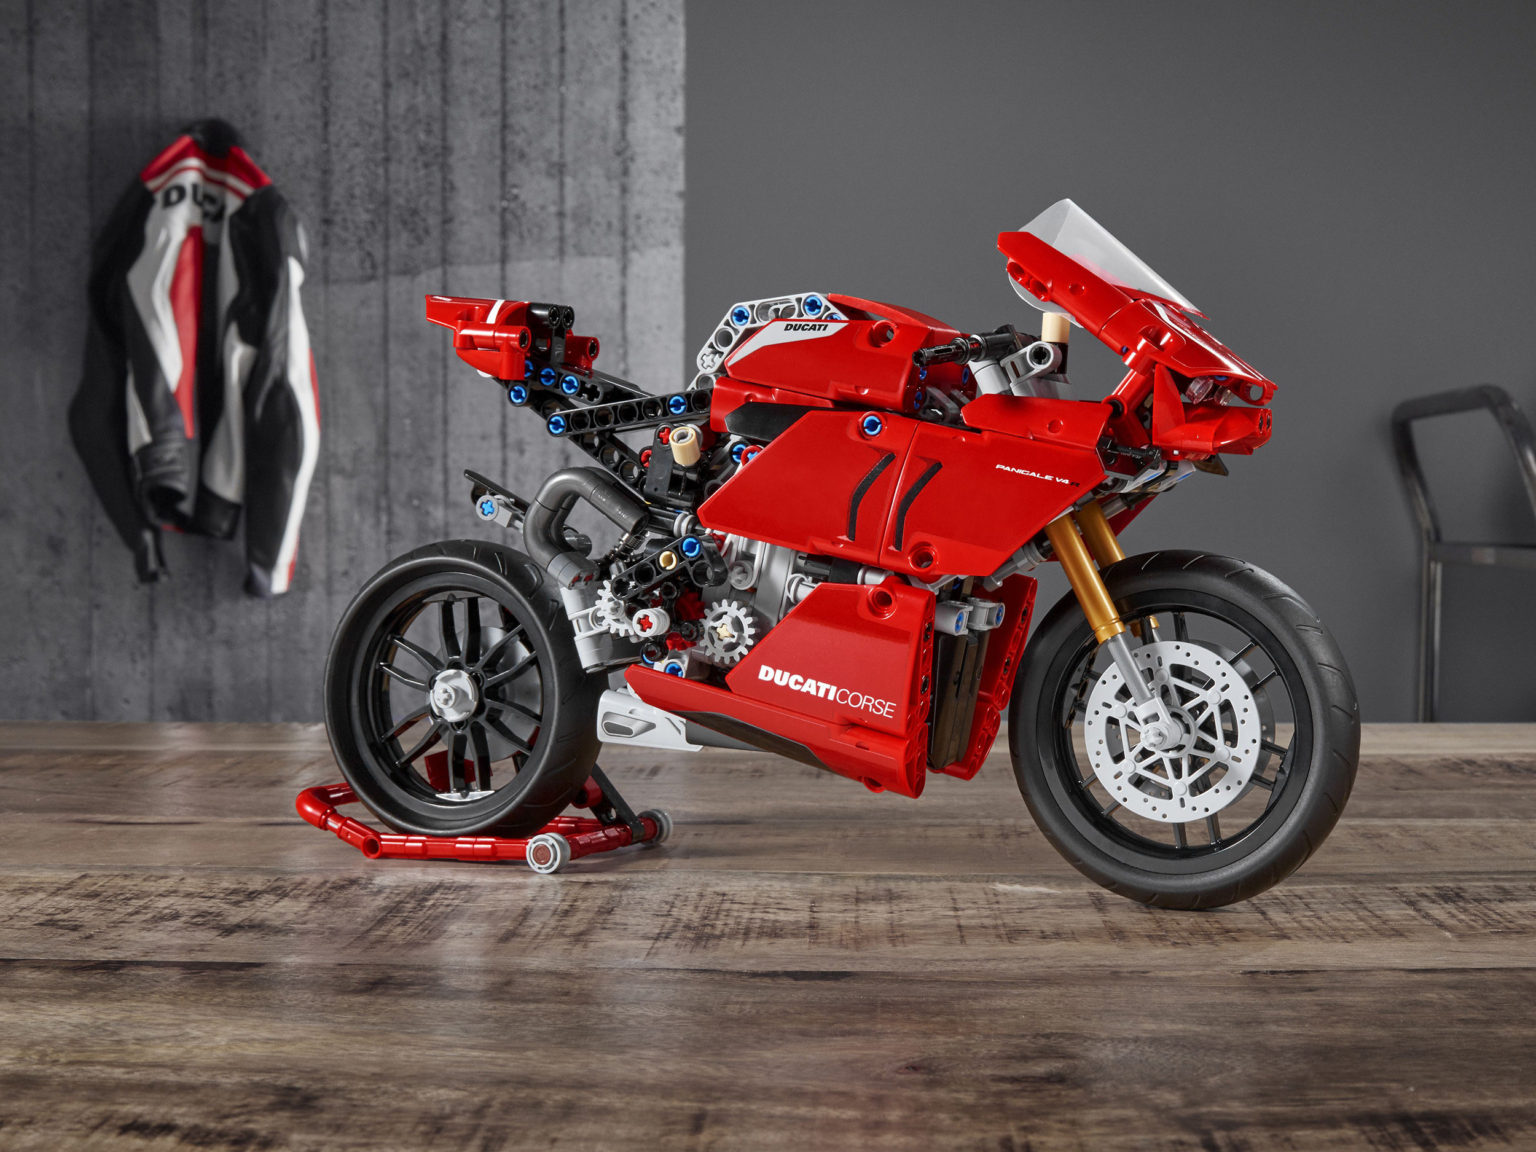 A working model of the Ducati Panigale V4 R is coming to a LEGO store near you.